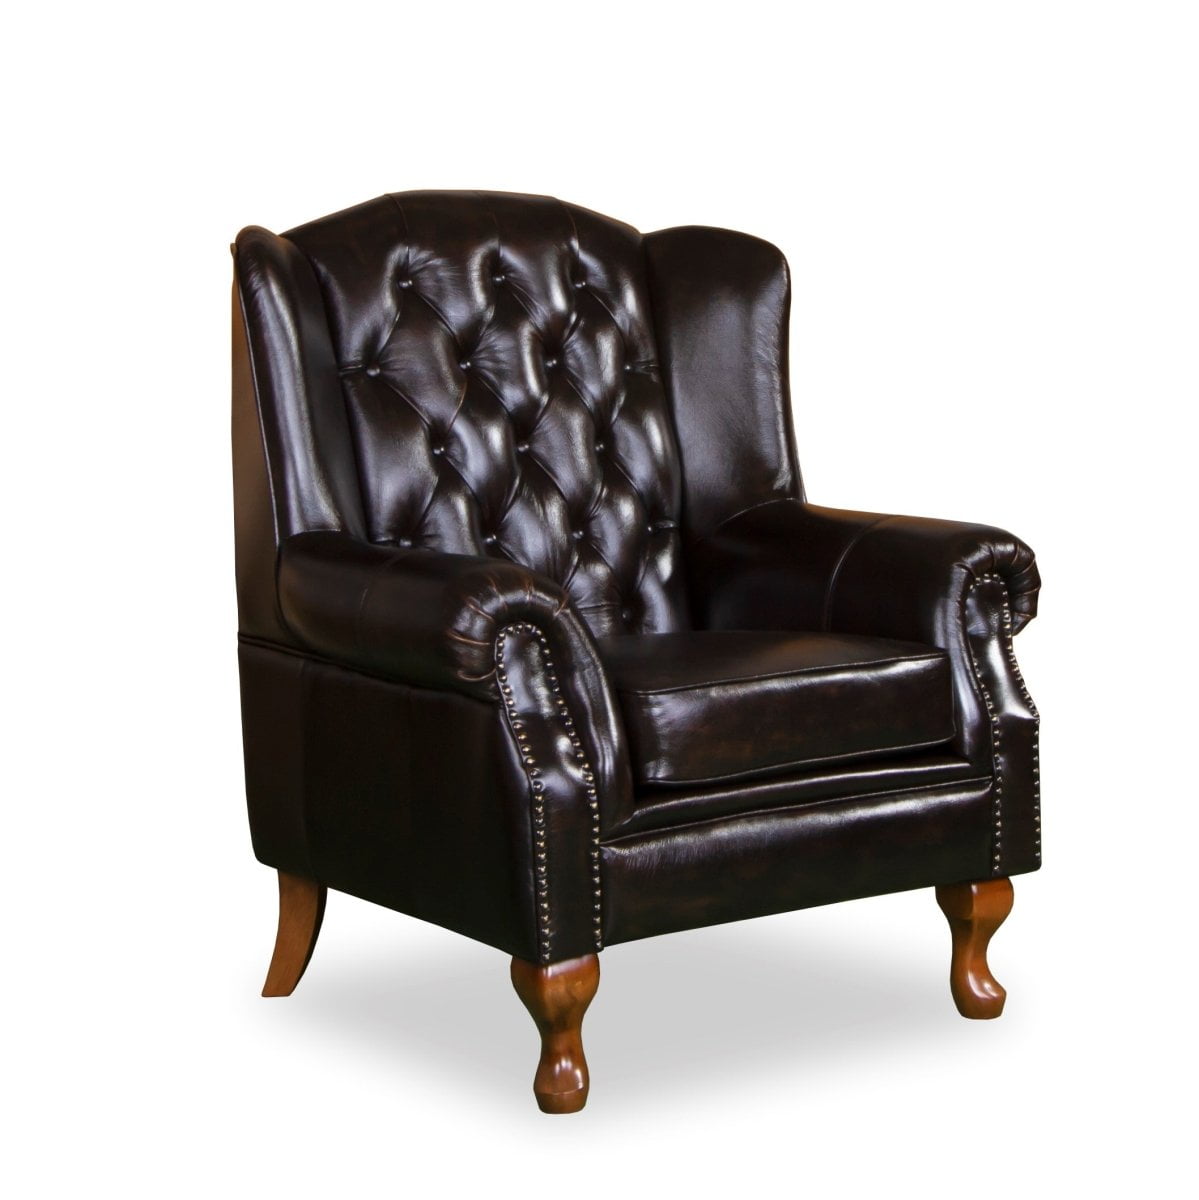 ROCHESTER Wing Chair Leather Sofa Col: W/O Brown picket and rail